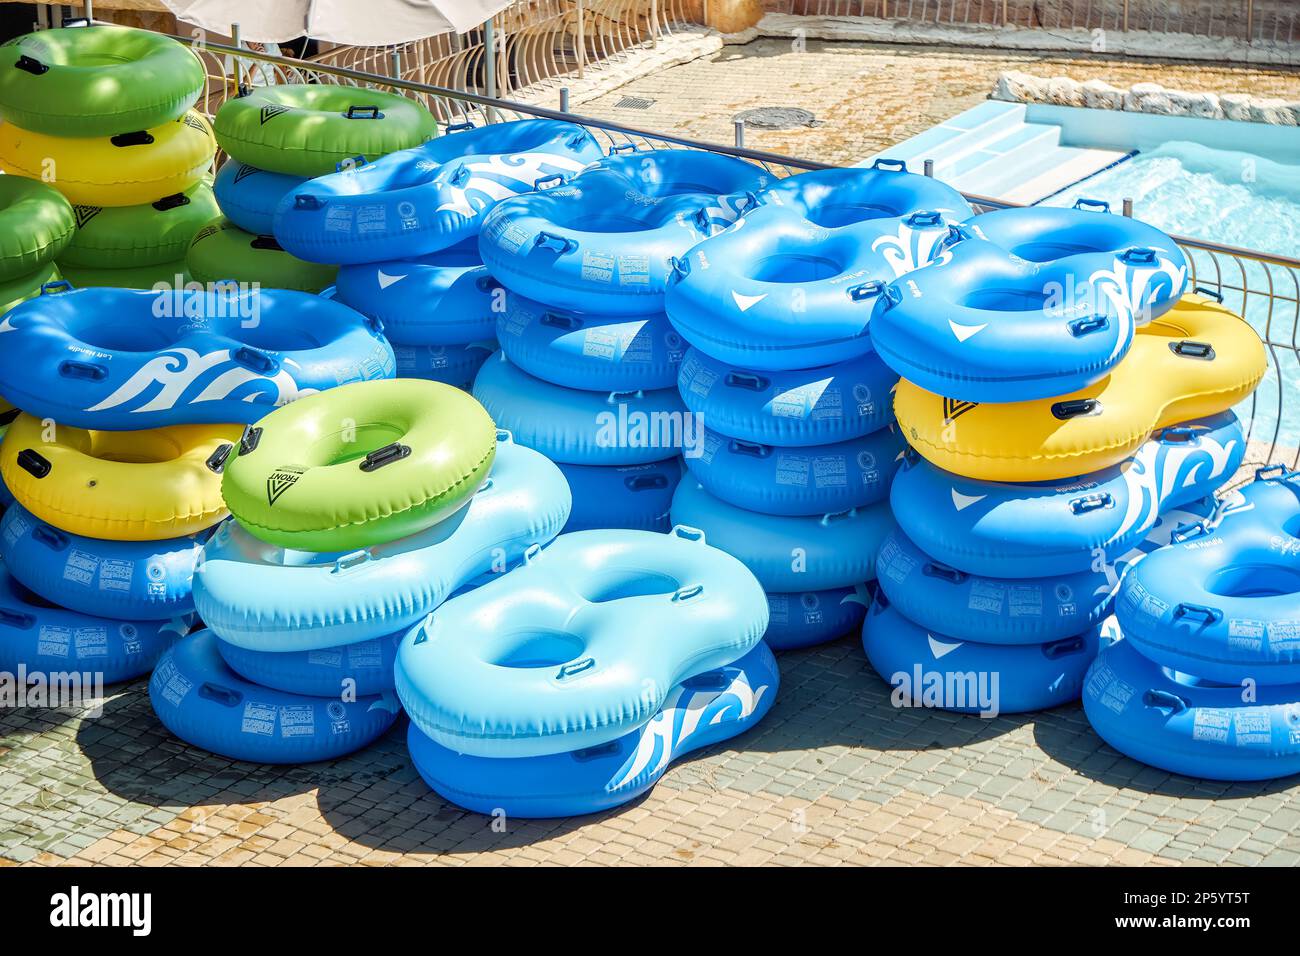 Multi-colored rubber rings for swimming pool put in rows at bright sunlight. Stacks of inflatable swim-rings ready for tourists in water park Stock Photo